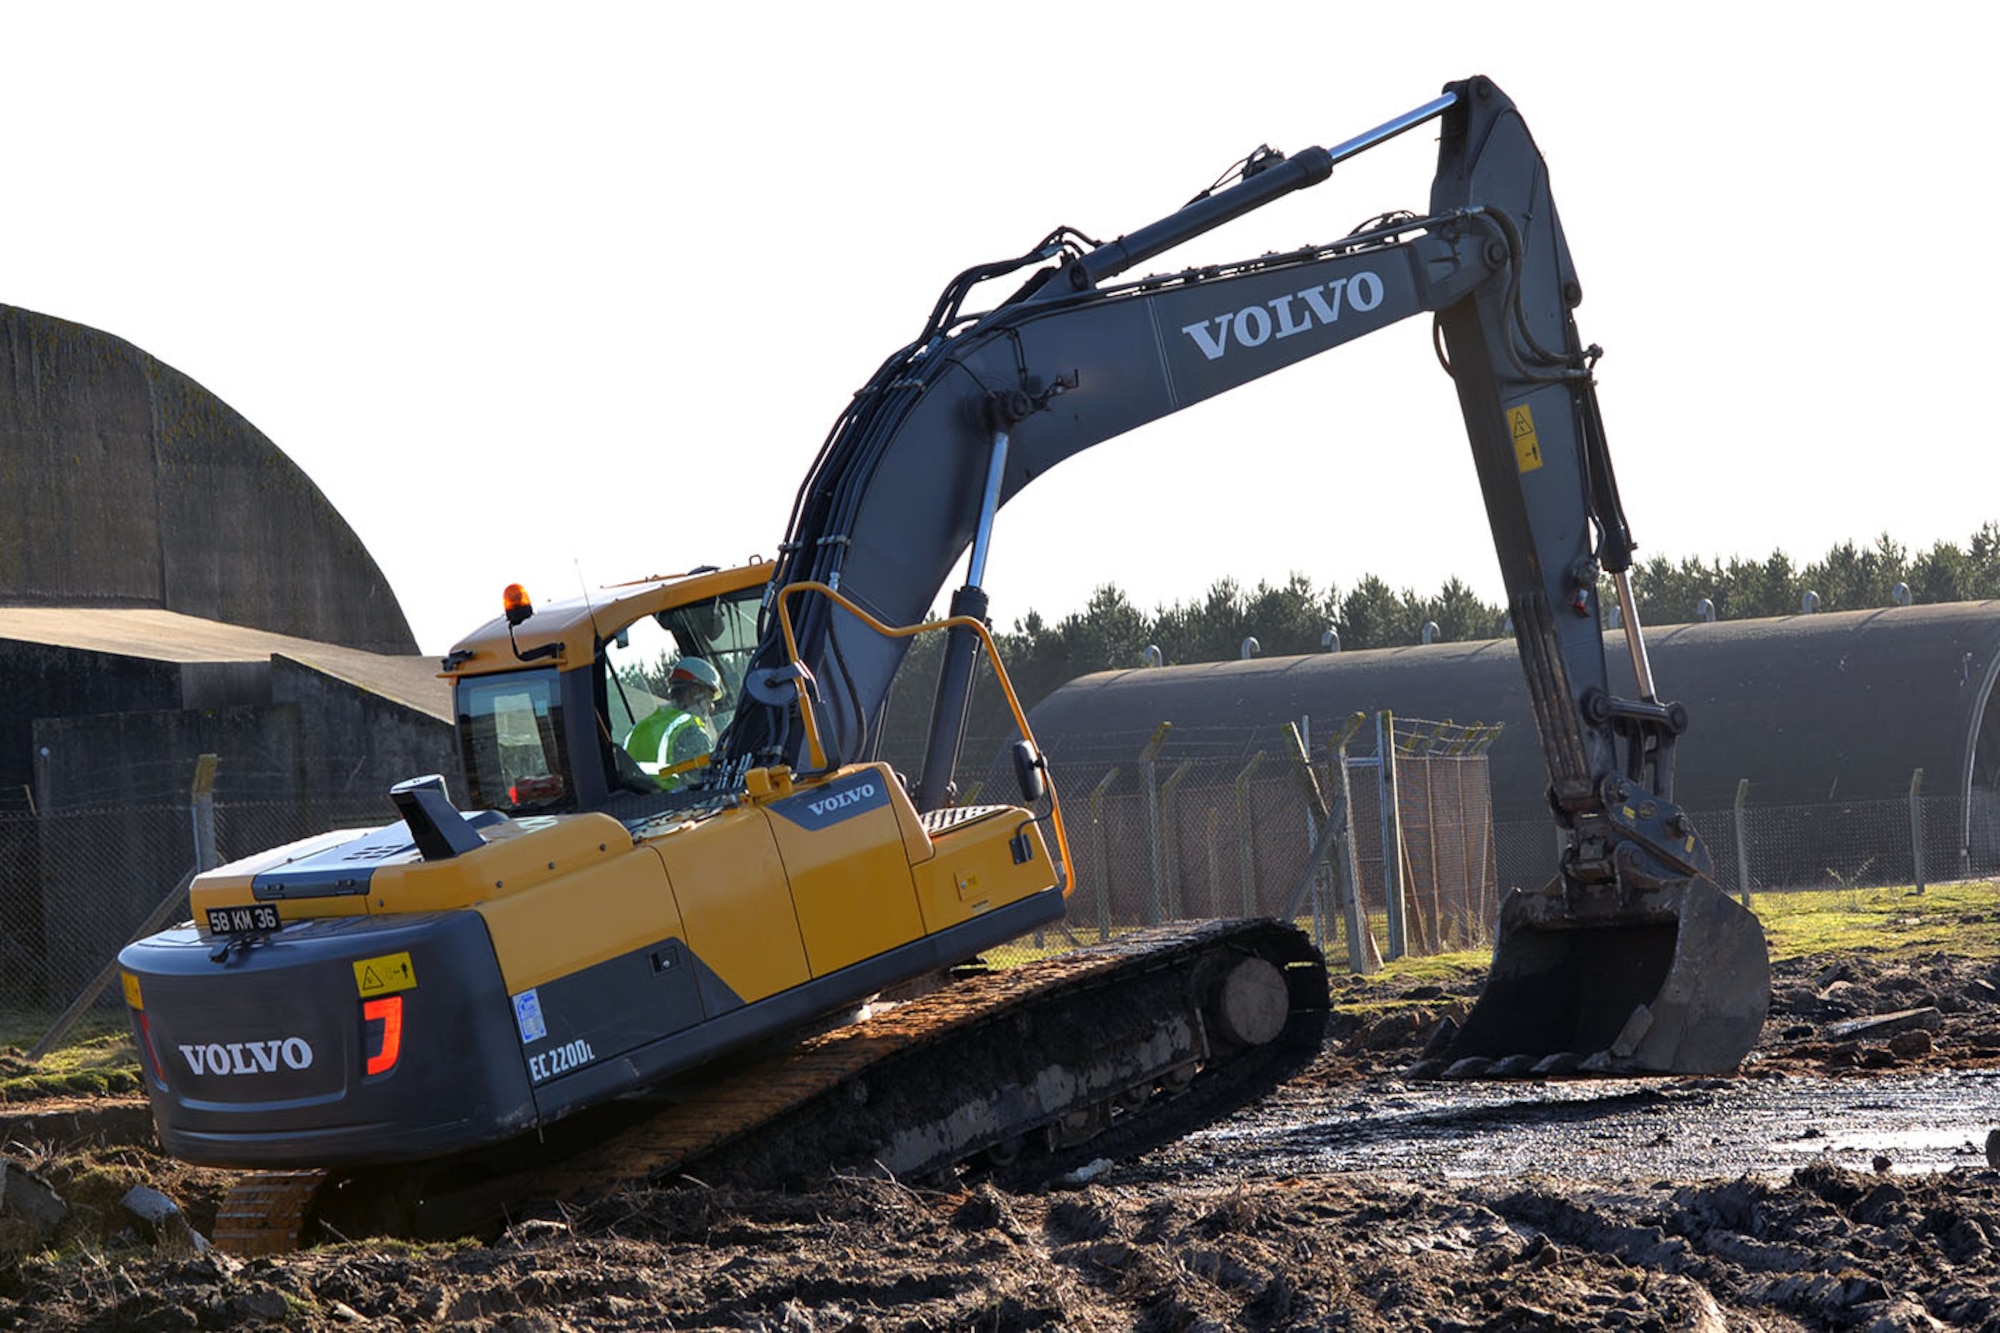 U.S. Air Force Staff Sgt. William Baynard, 100th Civil Engineer Squadron pavements and equipment supervisor, drives an excavator used by the British Army at Rock Barracks, Woodbridge, England, Jan. 25, 2018. The excavator followed the jack hammer – used to initially break up the concrete – and rip up chunks of it to be hauled away. Using the equipment gave the 100th CES Airmen valuable “stick time,” which they are not easily able to get as there are no excavators at RAF Mildenhall. (U.S. Air Force photo by Karen Abeyasekere)